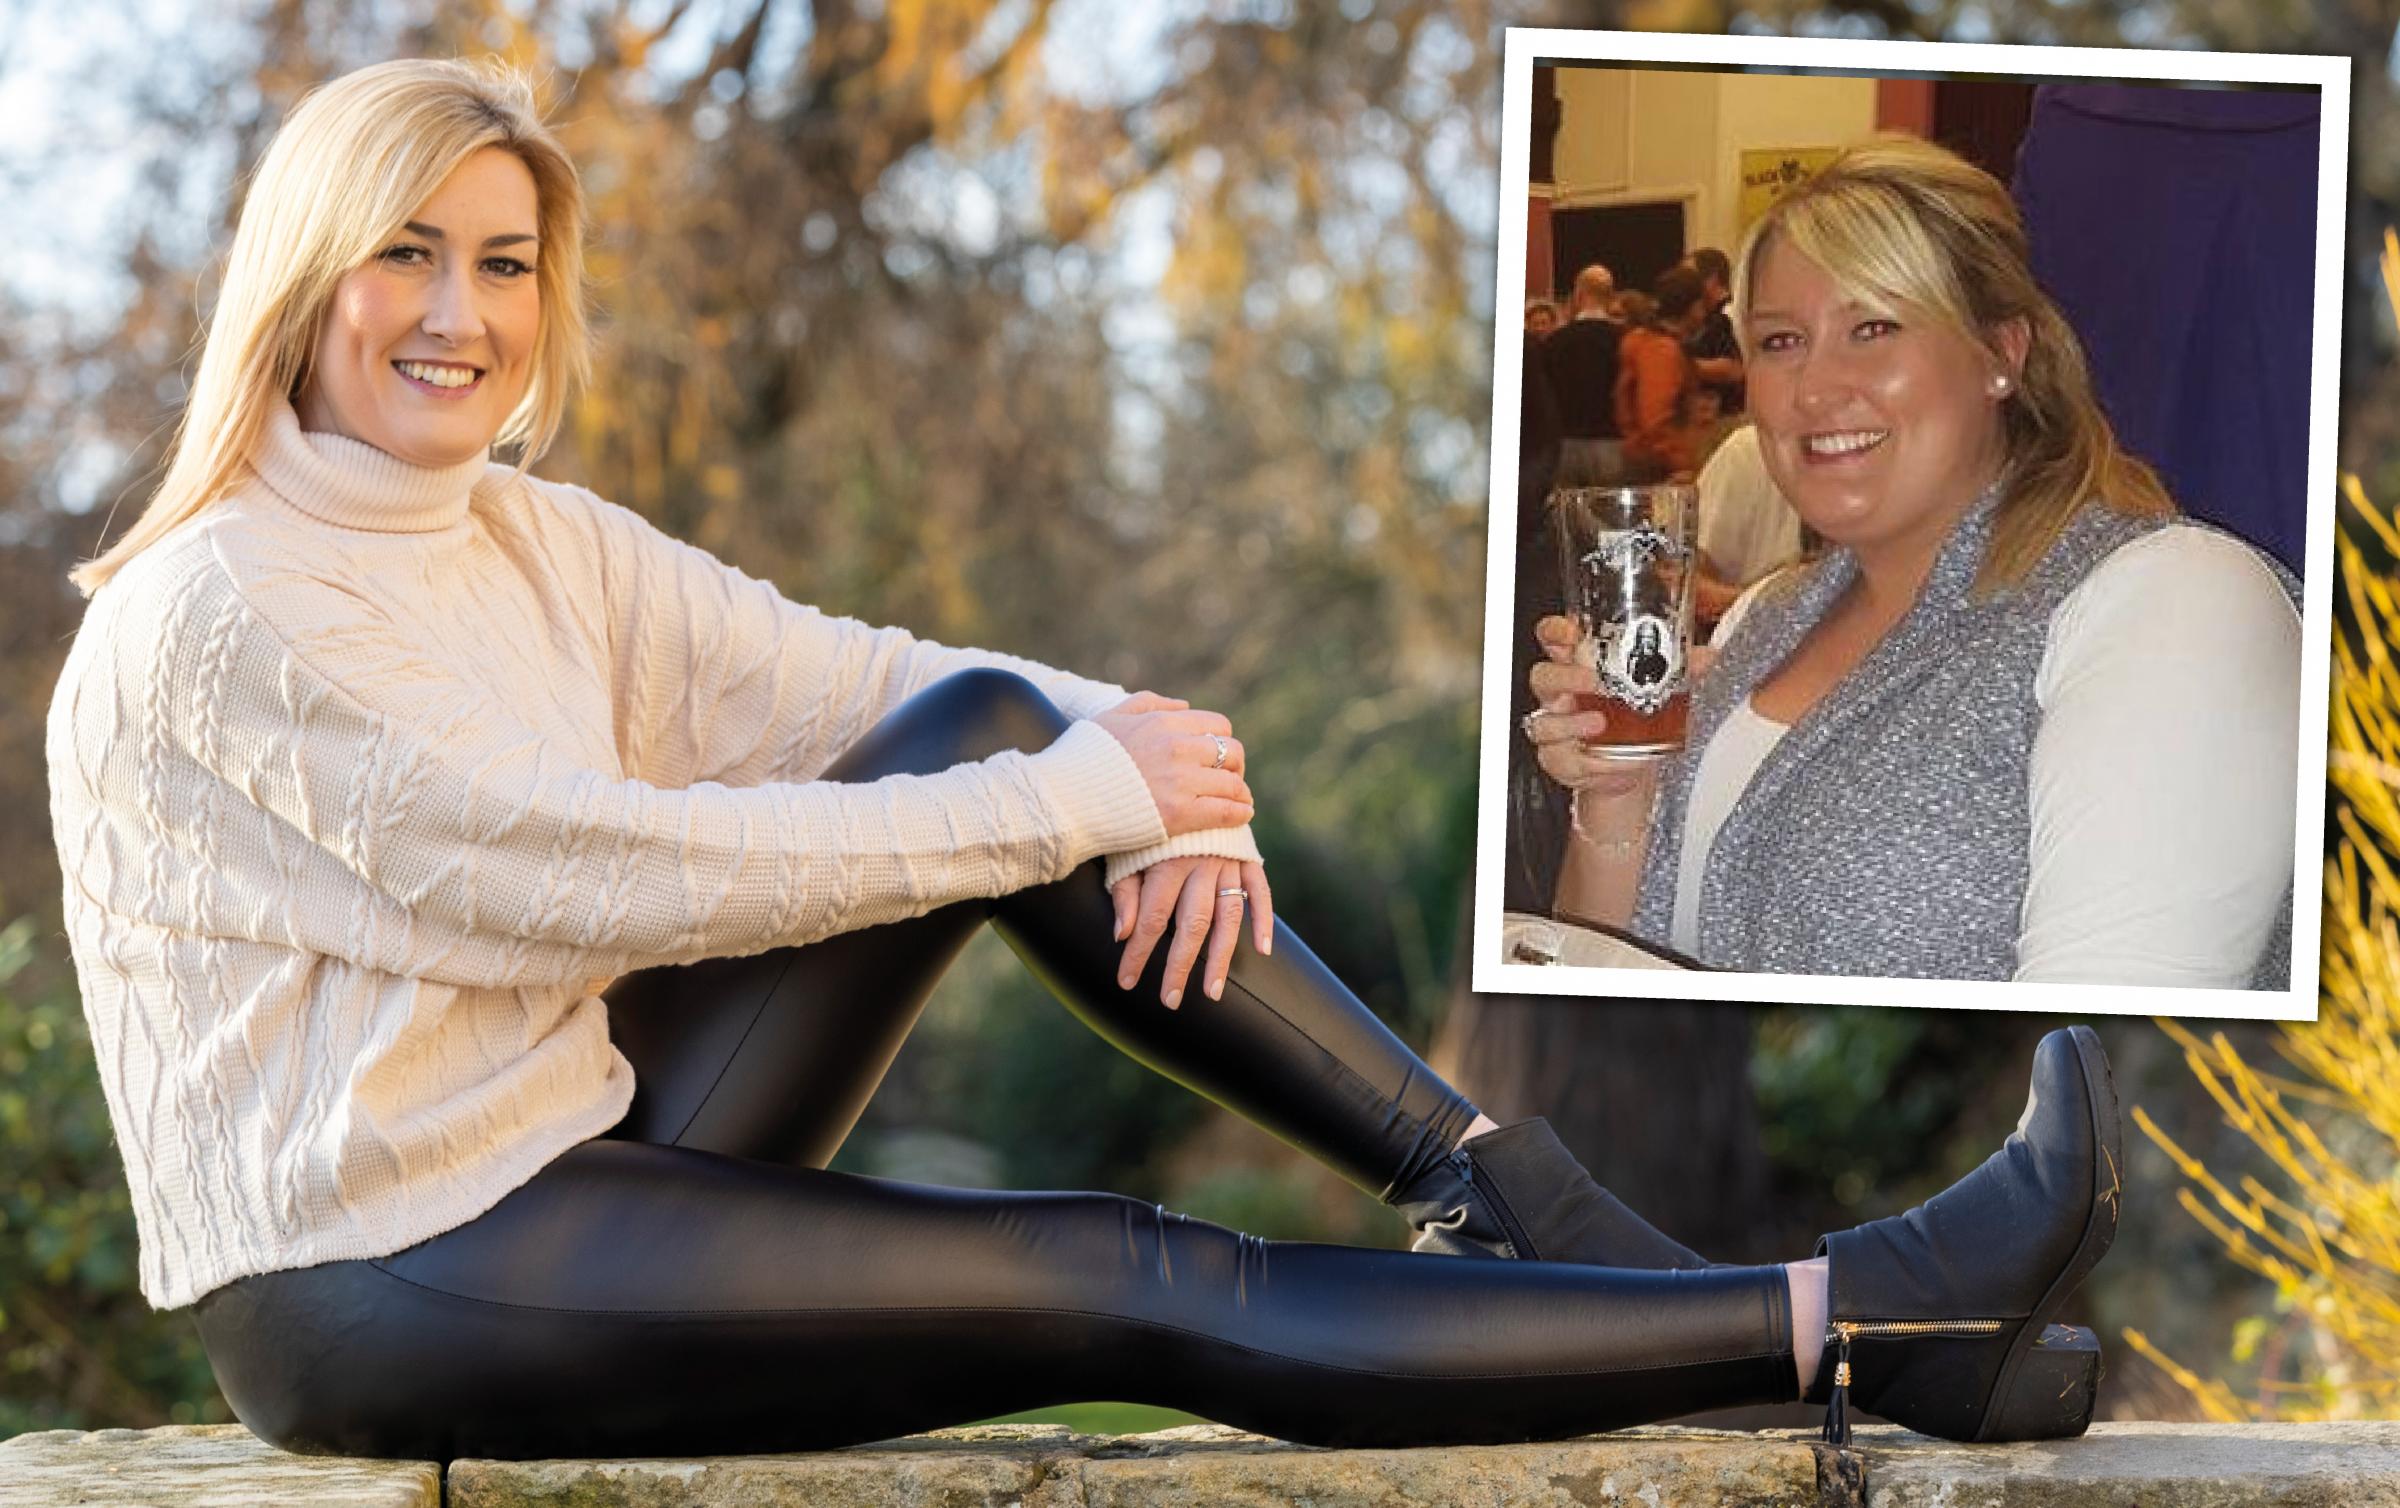 Alloa woman opens up on health transformation